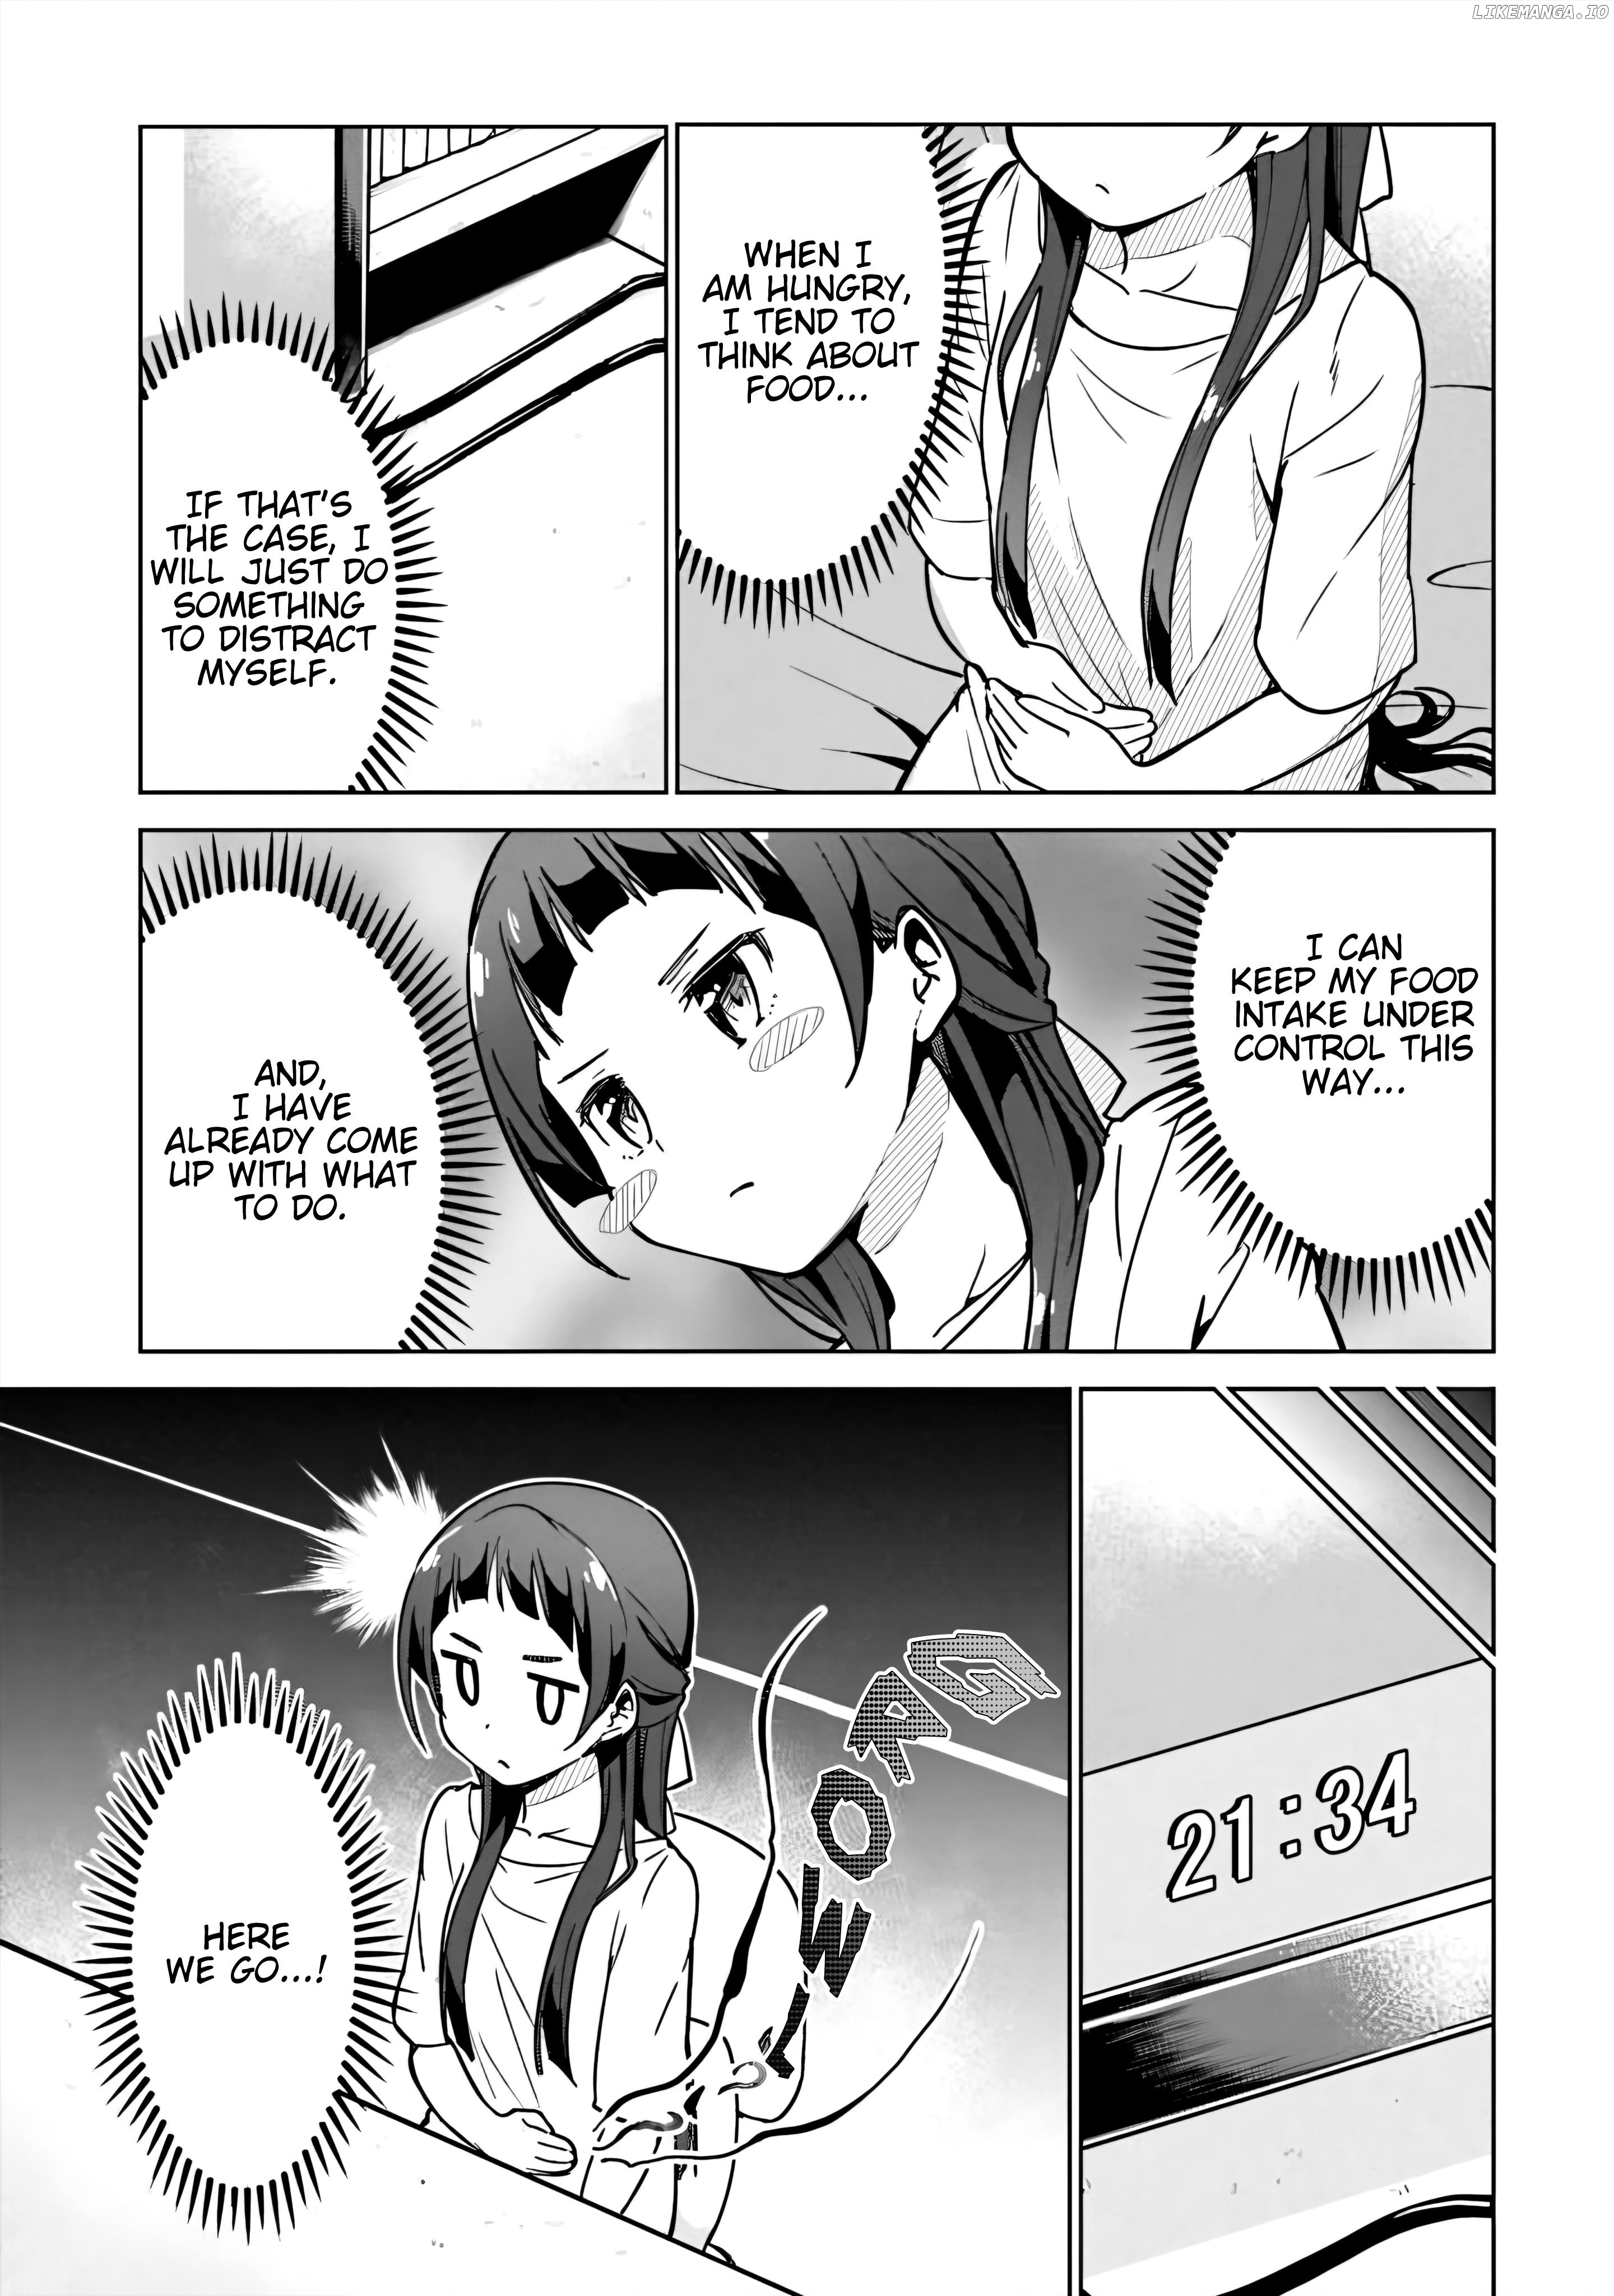 Sakura Quest Side Story: Ririko Oribe's Daily Report Vol 1 chapter 4 - page 9